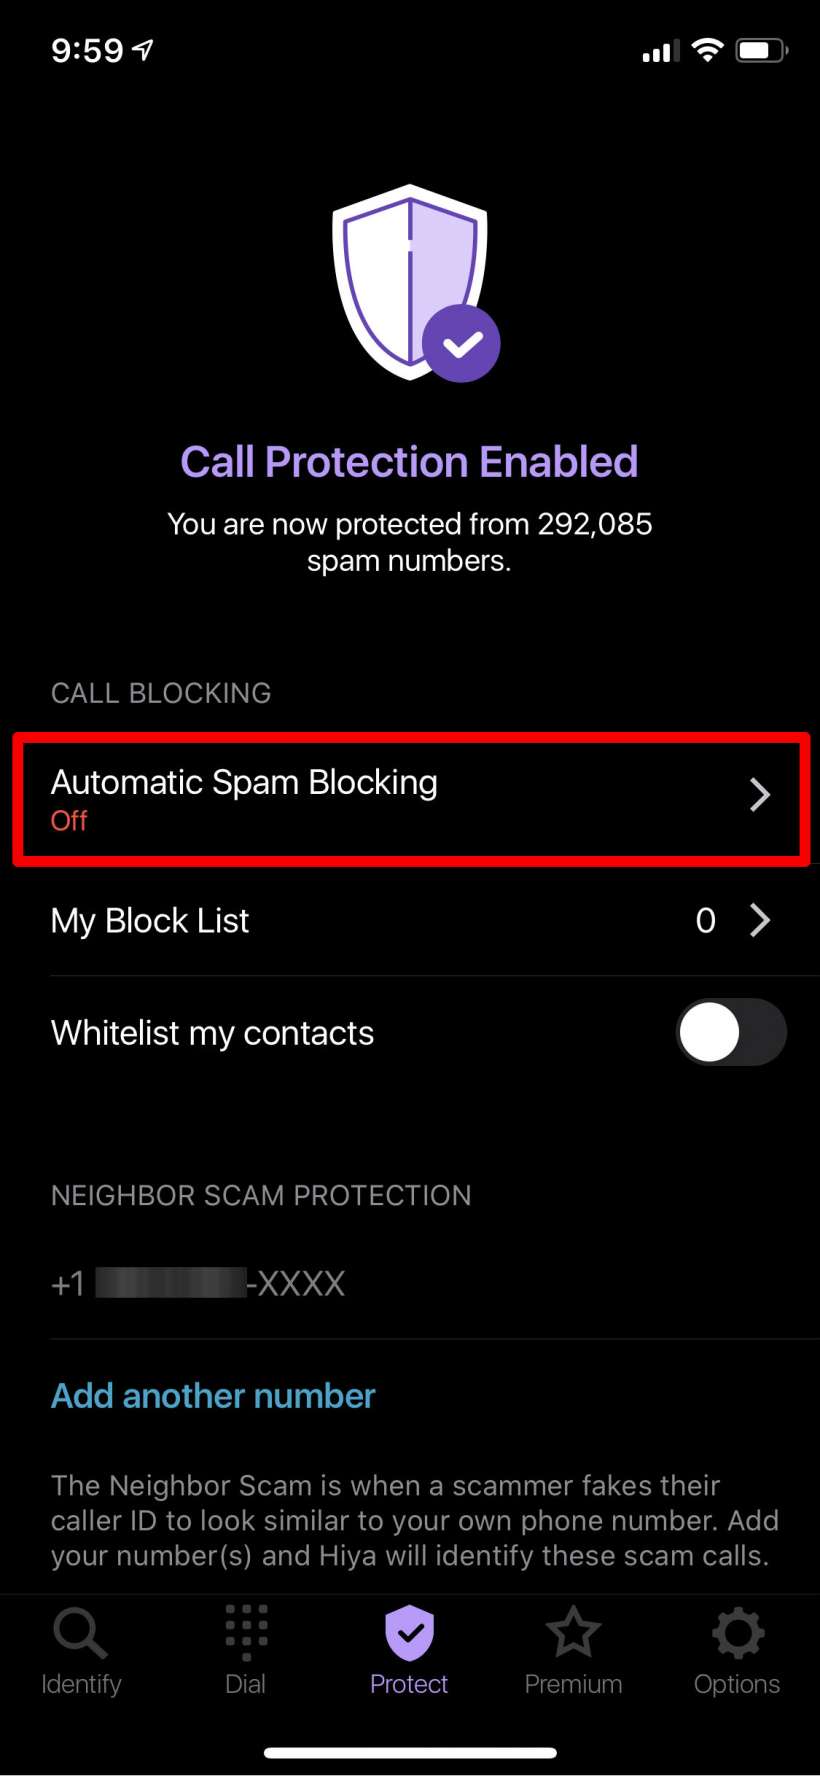 How to block calls from your area code on iPhone.